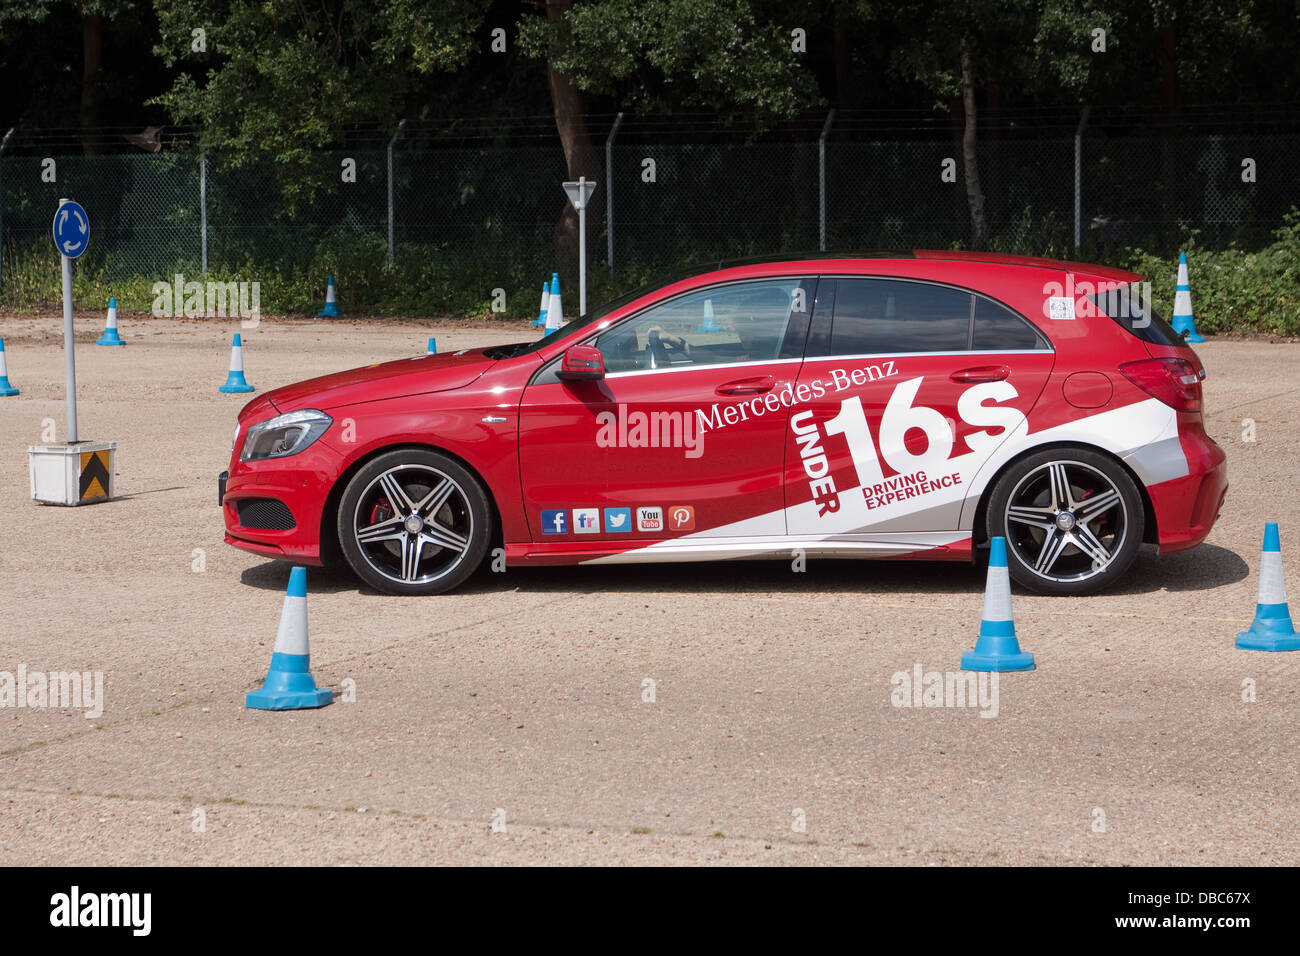 A young driver taking part in an under 16s driving experience at Mercedes-Benz world UK, Weybridge, Surrey Stock Photo